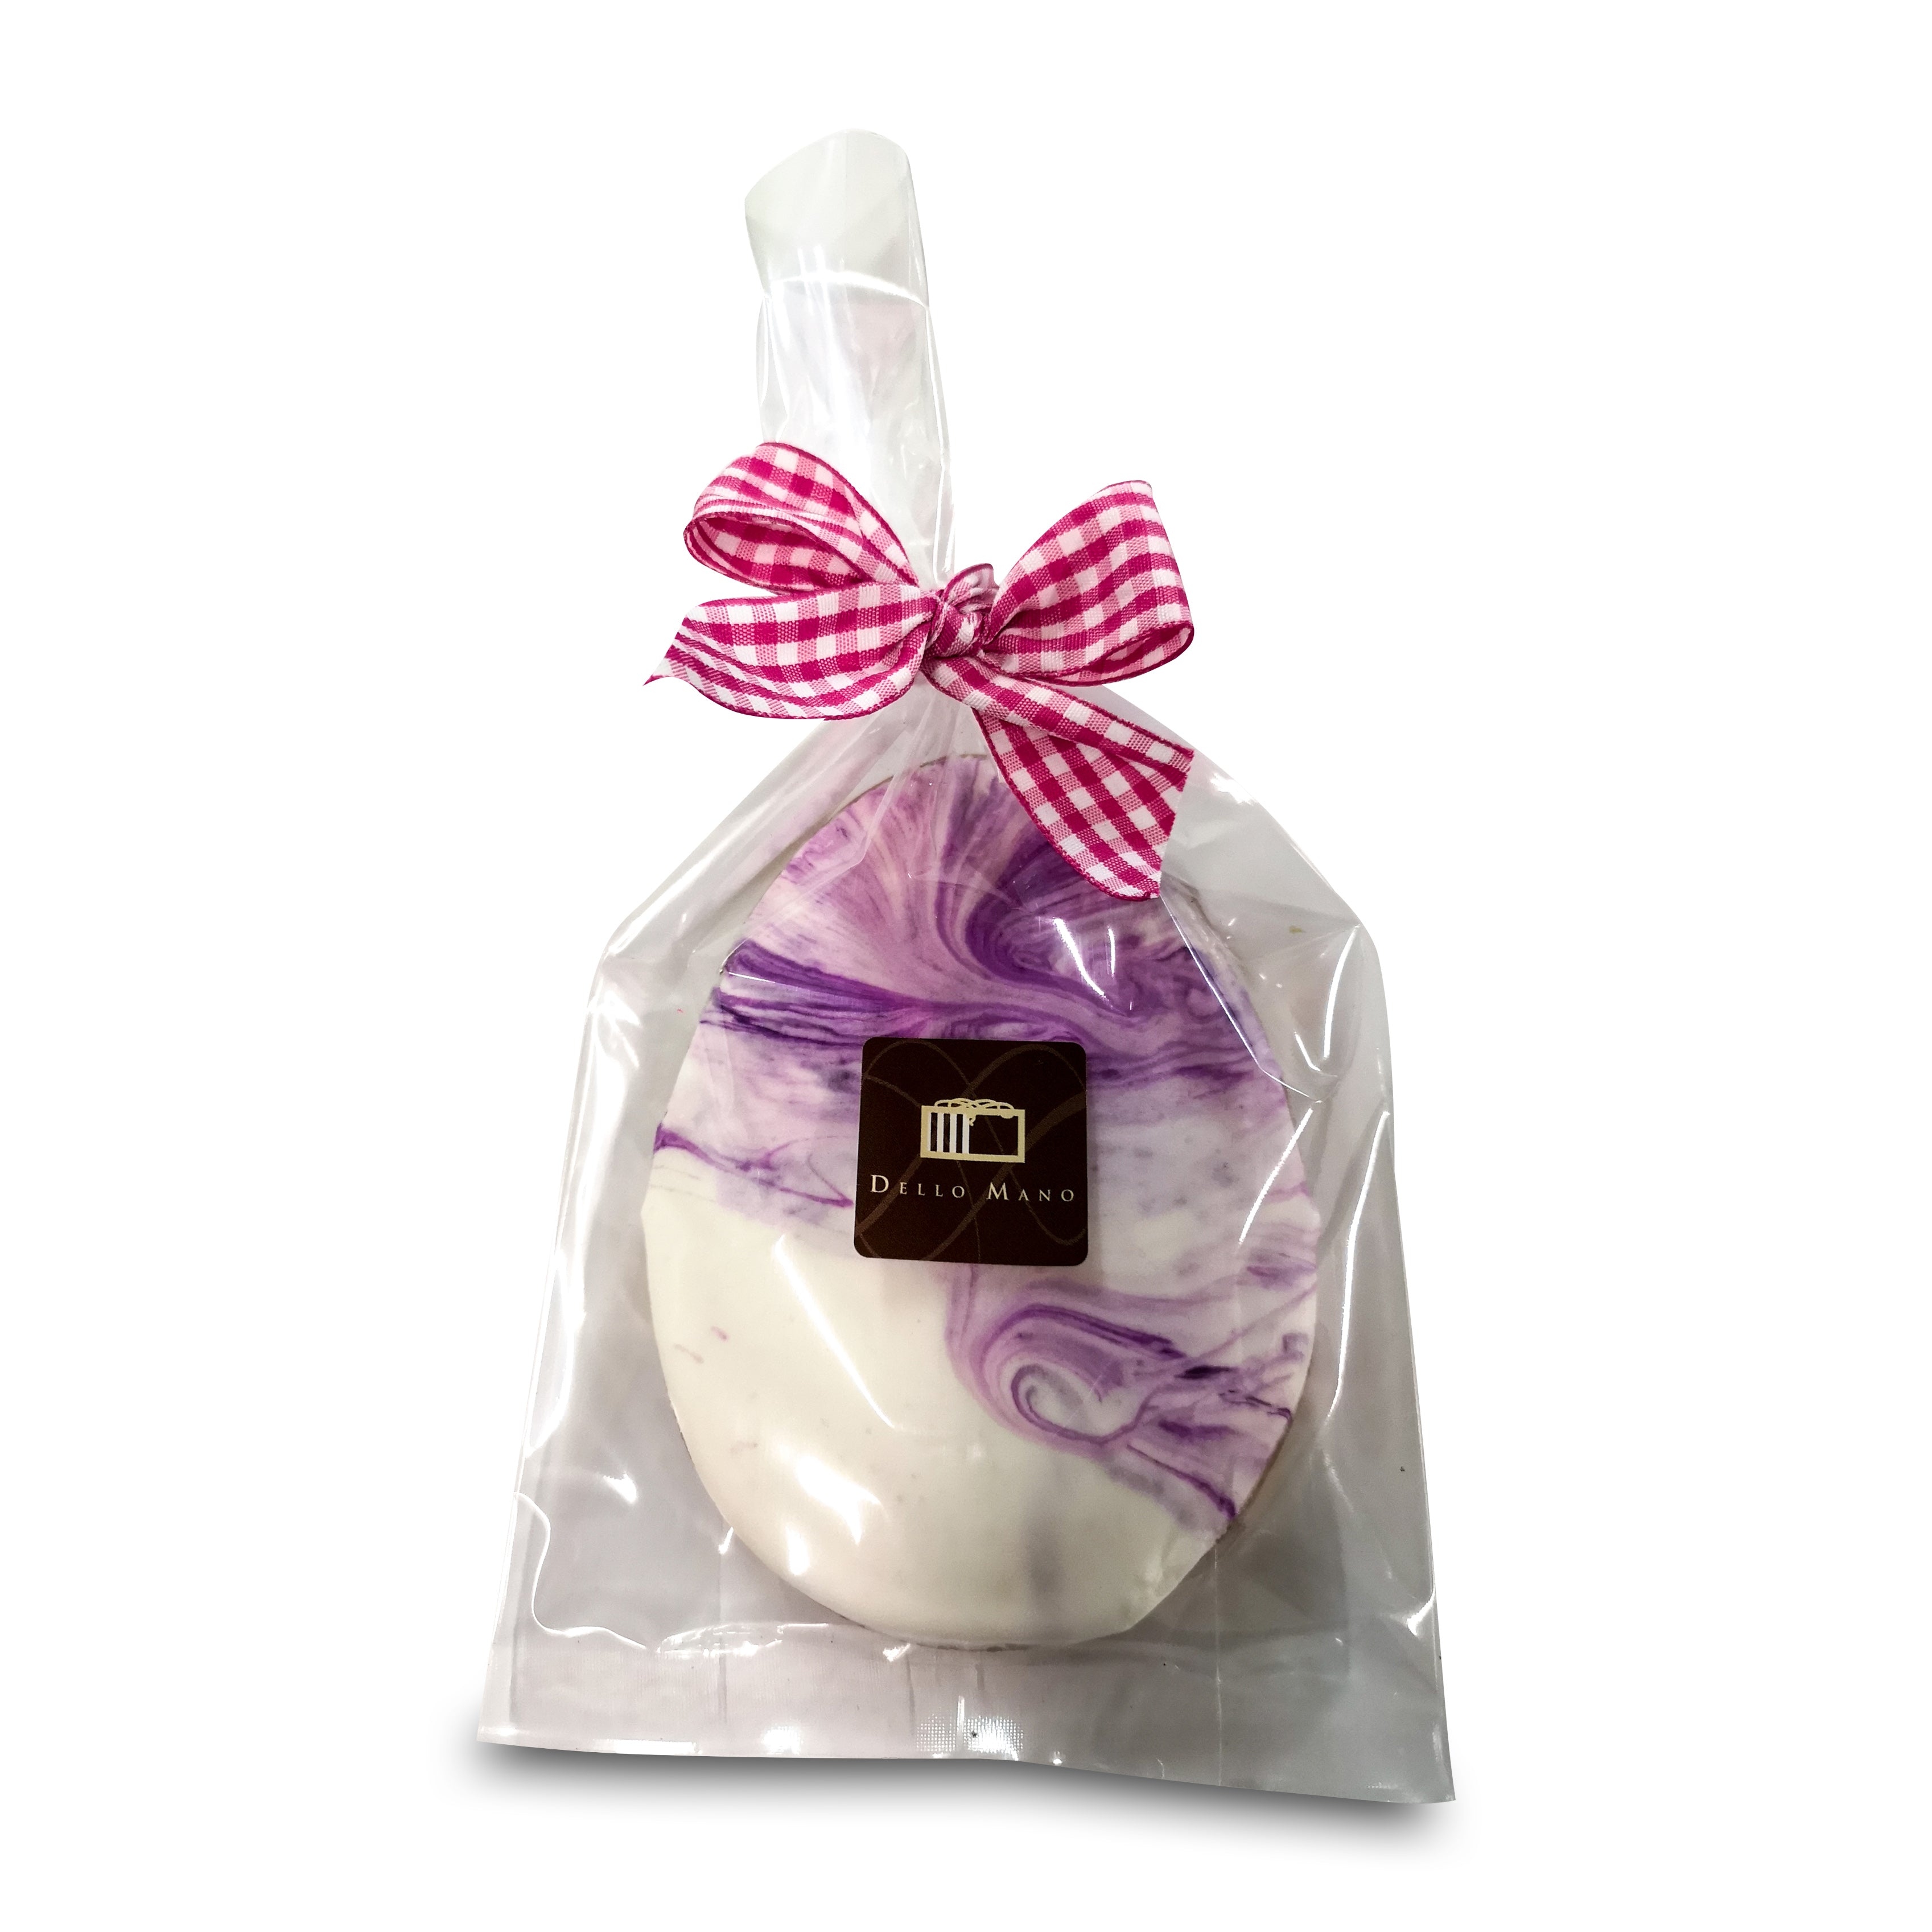 An Easter Egg Gingerbread in a clear bag and finished with ribbon.